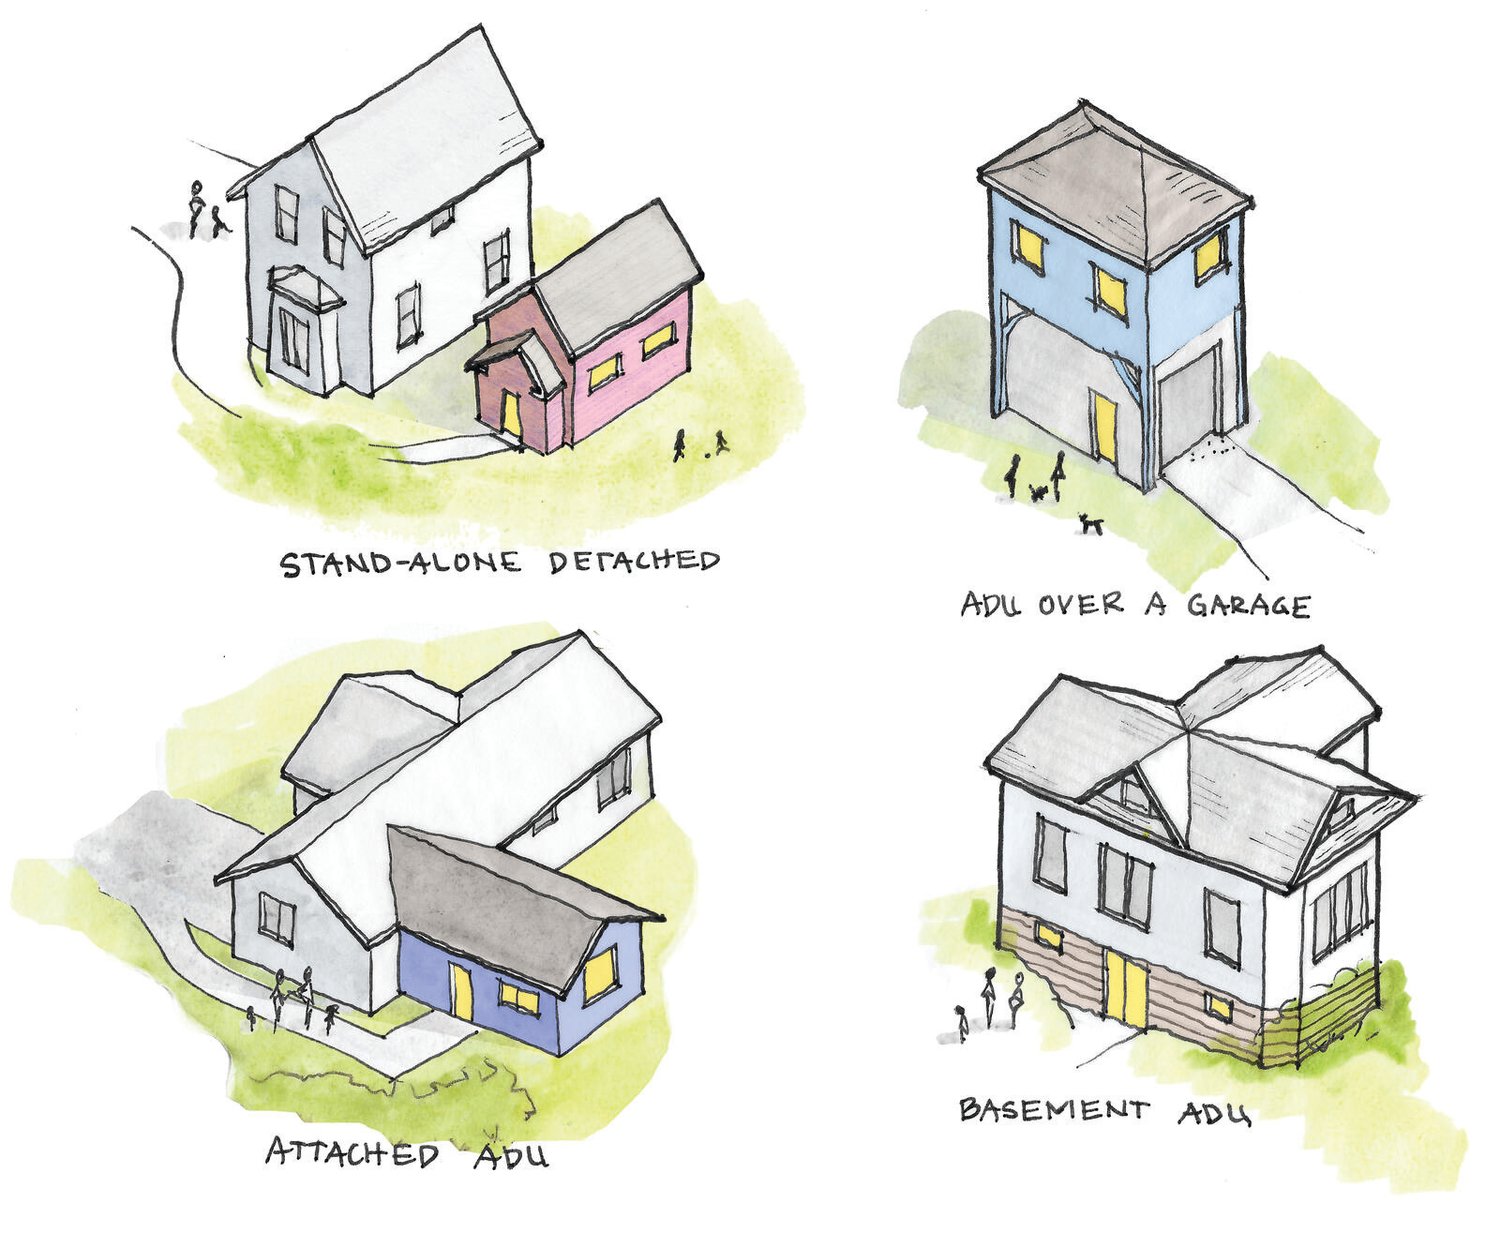 While Accessory Dwelling Units, or ADUs, like the ones shown here are an excellent choice for long-term rentals, city code forbids the use of ADUs for short term rentals, defined as housing used for a stay of under 30 days.